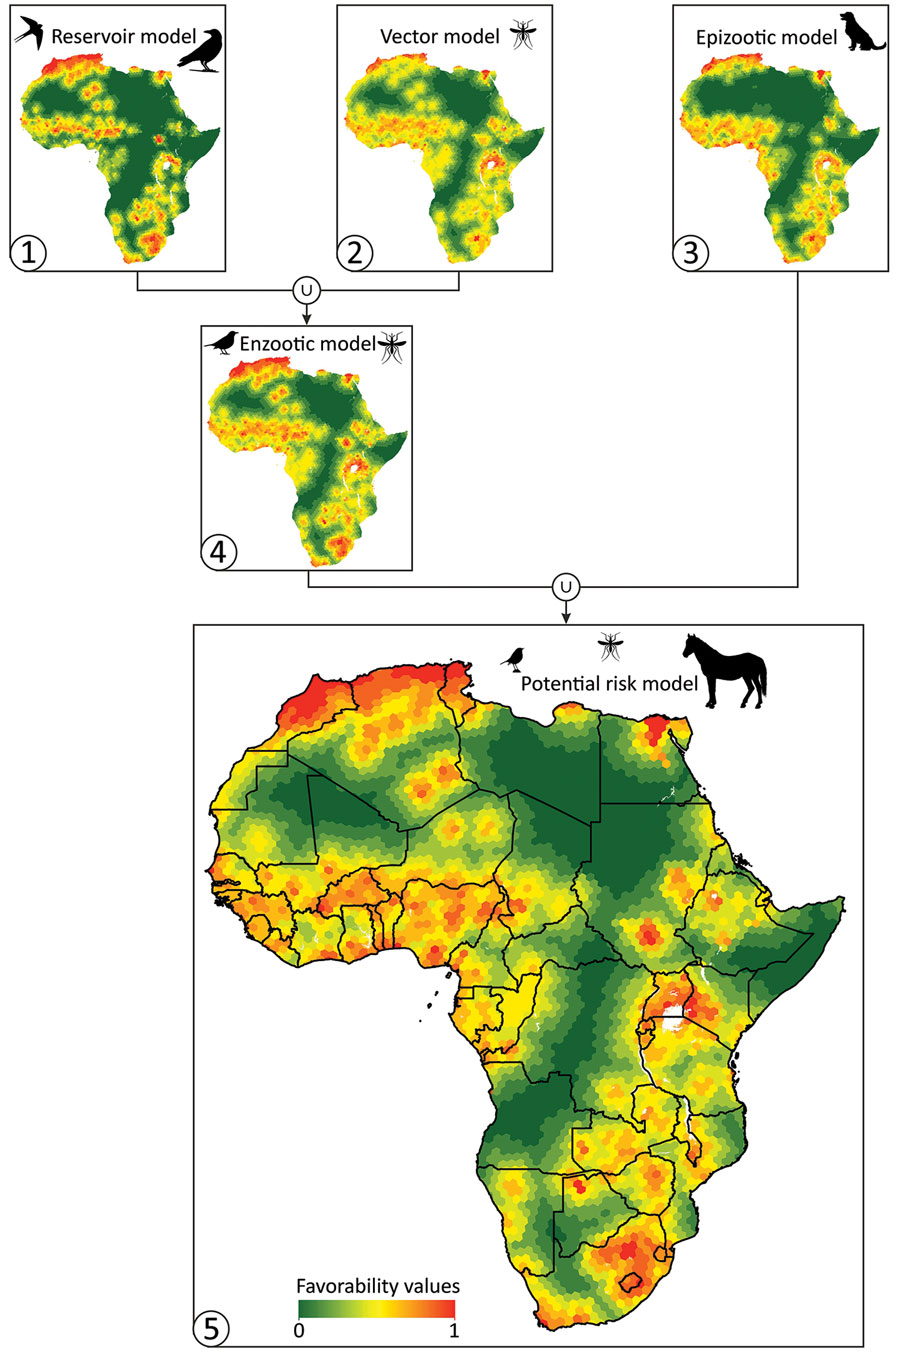 Cartographic representation of the biogeographic models (numbered 1–5) based on the different West Nile virus lifecycle components for Africa. Model 1 (reservoir model) indicates environmental favorability for the presence of the virus in birds. Model 2 (vector model) indicates environmental favorability for the presence of the virus in vectors. Model 3 (epizootic model) indicates environmental favorability for the presence of the virus in nonhuman mammals. Model 4 (enzootic model) indicates environmental favorability for the presence of the virus in >1 component of the enzootic virus cycle. Model 5 (potential risk model) indicates environmental favorability for potential spillover of the virus.